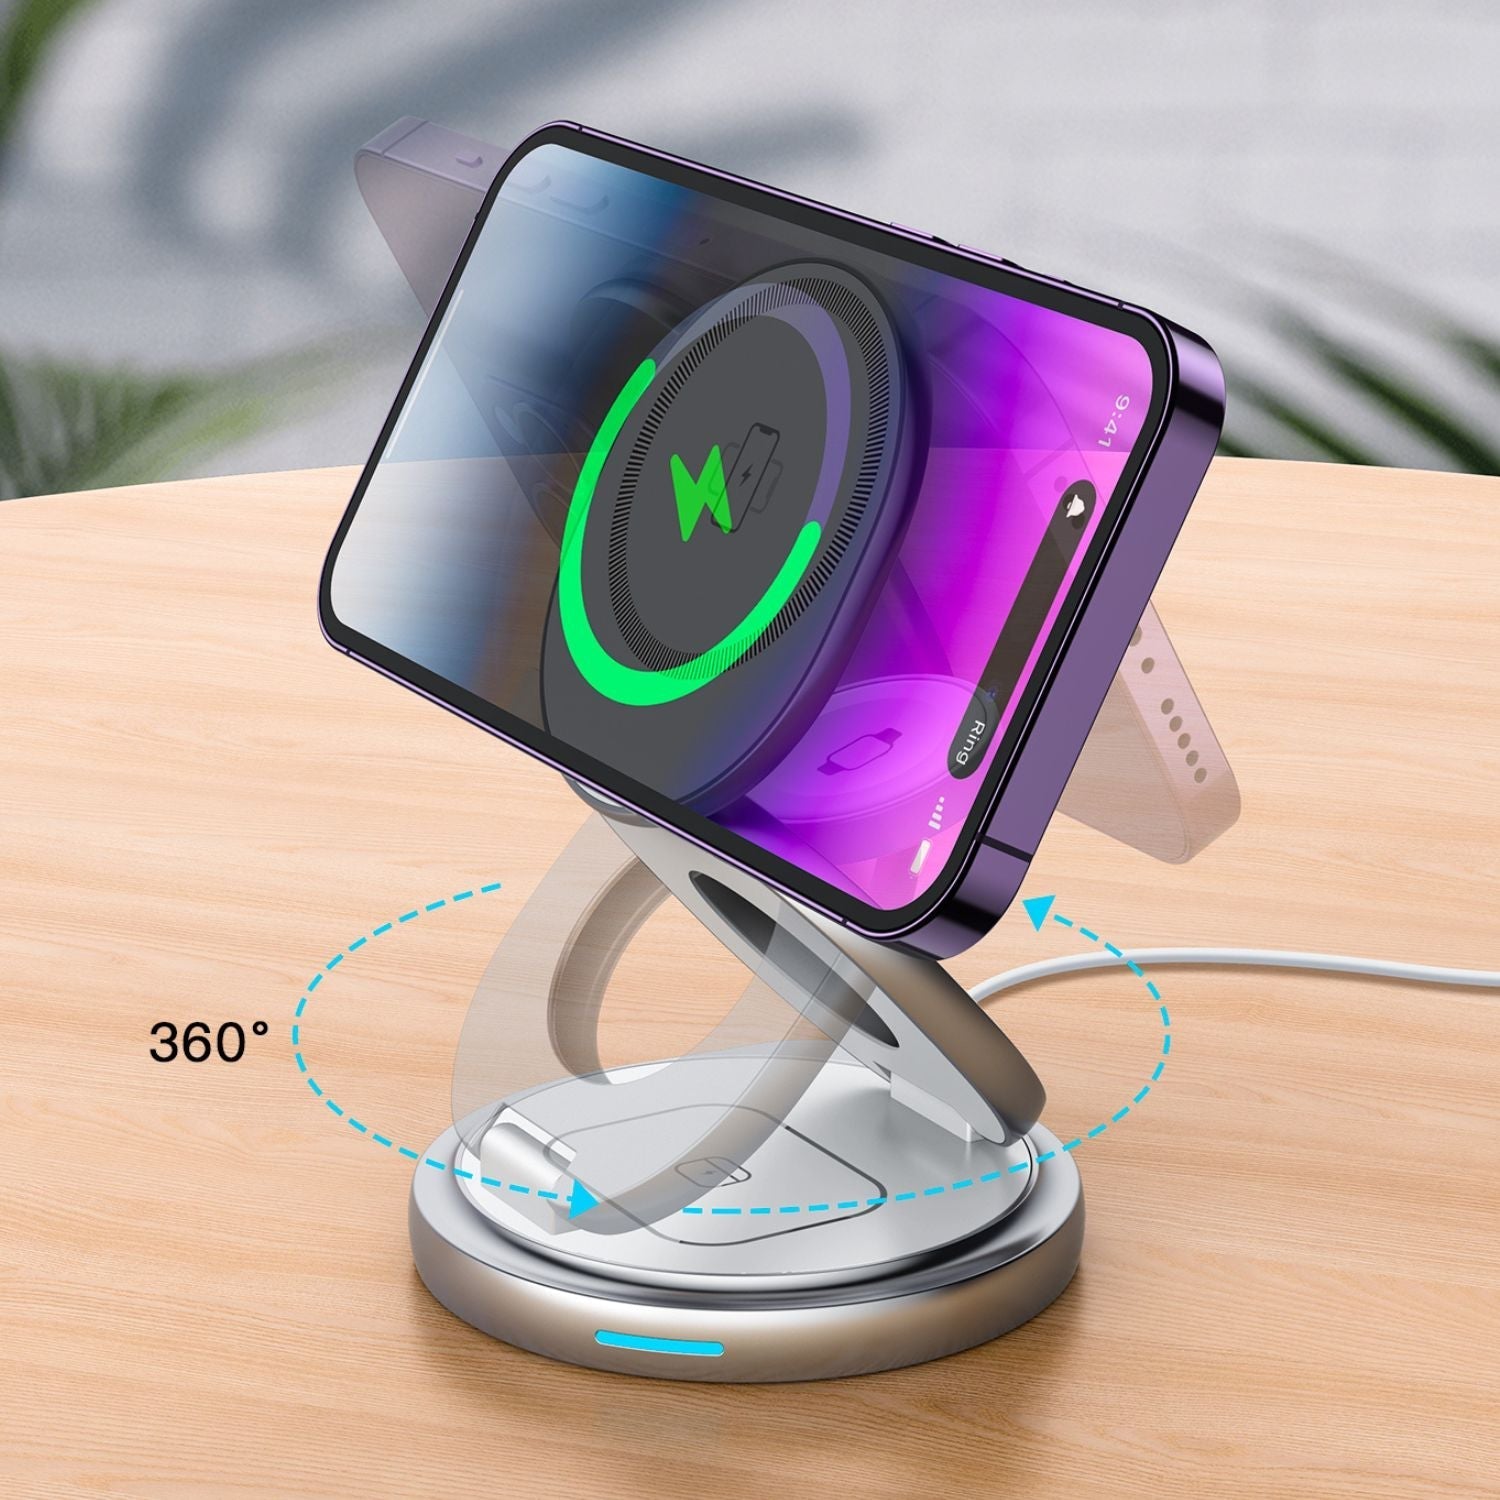 Rotating 3-in-1 Foldable Wireless MagSafe Charger for Apple DevicesQuantumX Chargers